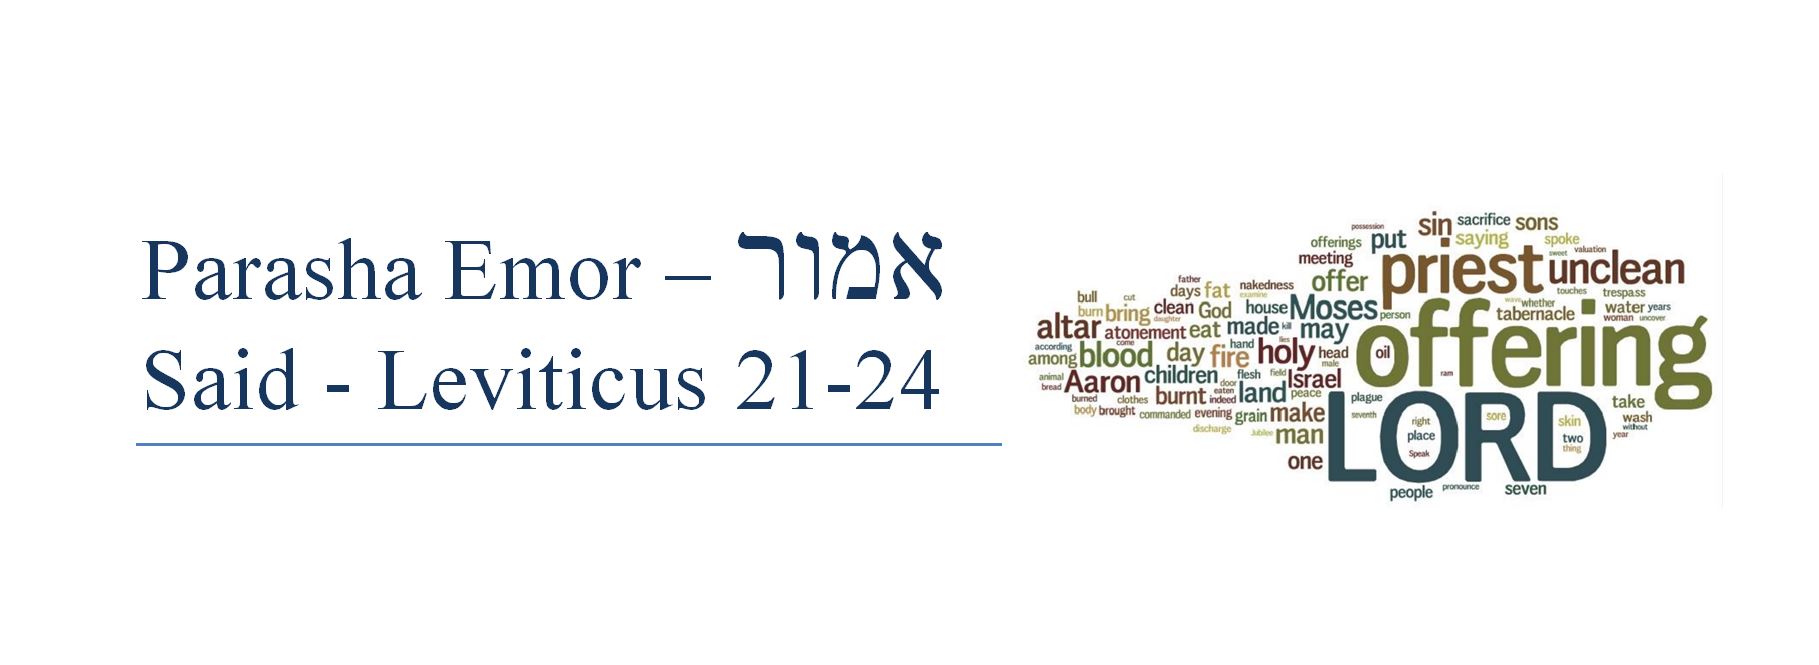 Emor 2017, Parsha (Book of Vayikra - Leviticus)